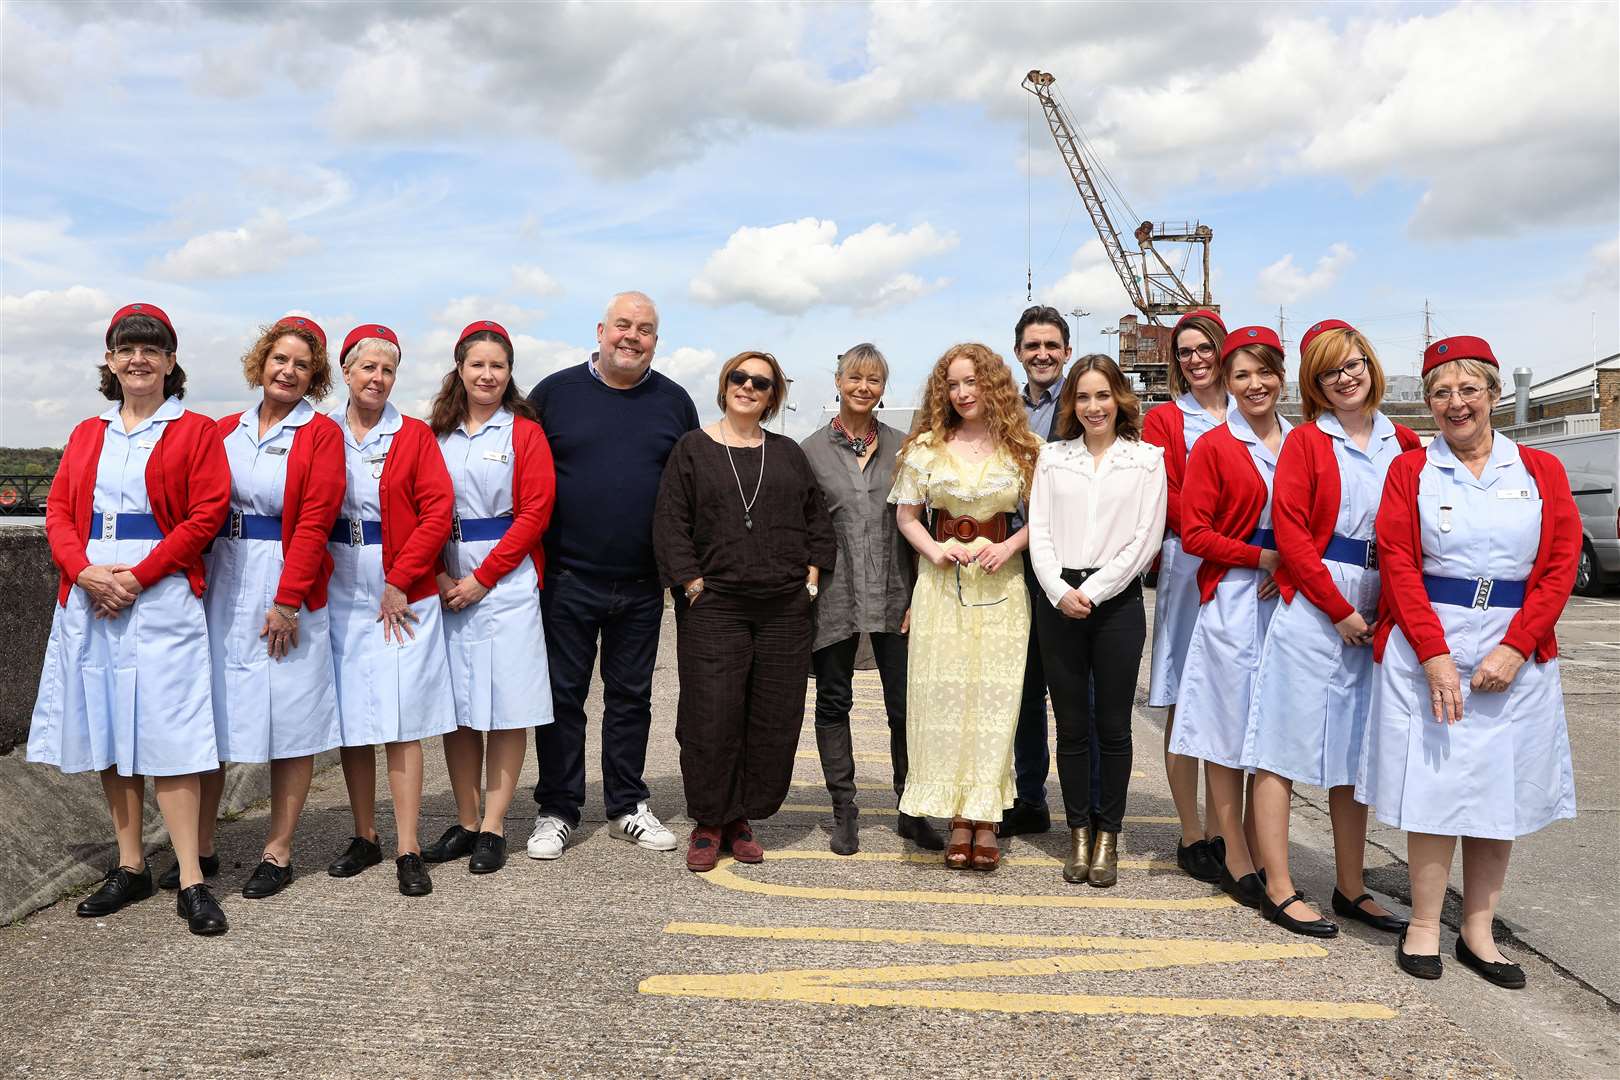 Call the Midwife exhibition and tours launch at Chatham Historic Dockyard - the cast with the dockyard tour guides (14275482)